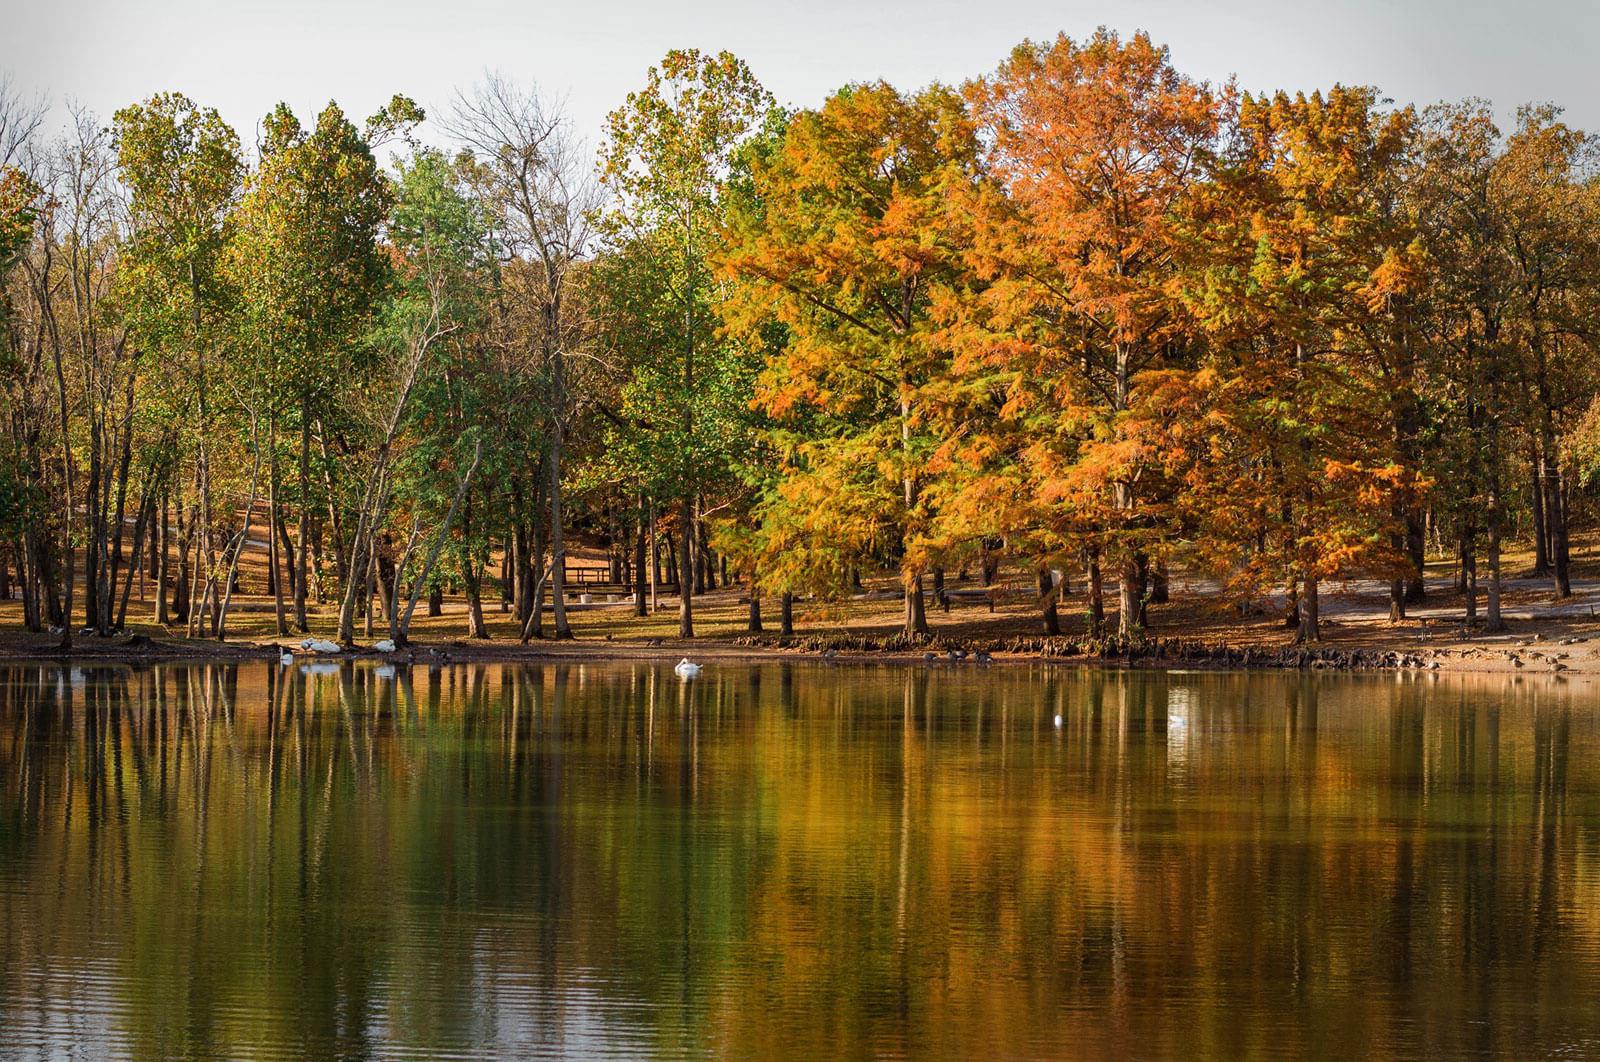 swans swimming in lake surrounded by fall colored trees